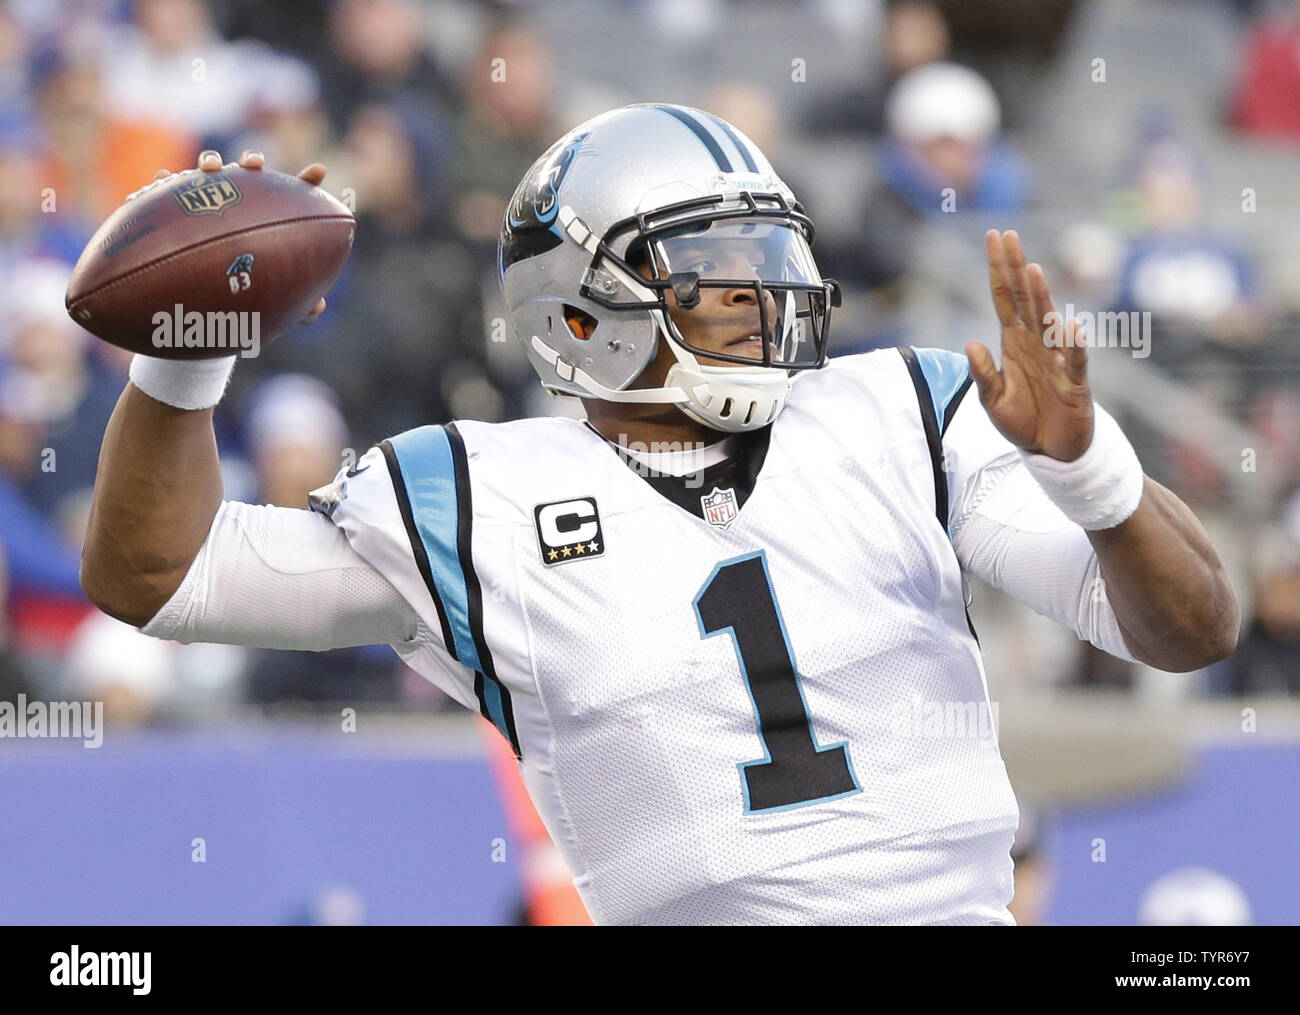 Carolina Panthers Cam Newton throws a pass in the second half against the New  York Giants at MetLife Stadium in East Rutherford, New Jersey on December  20, 2015. The Panthers defeated the